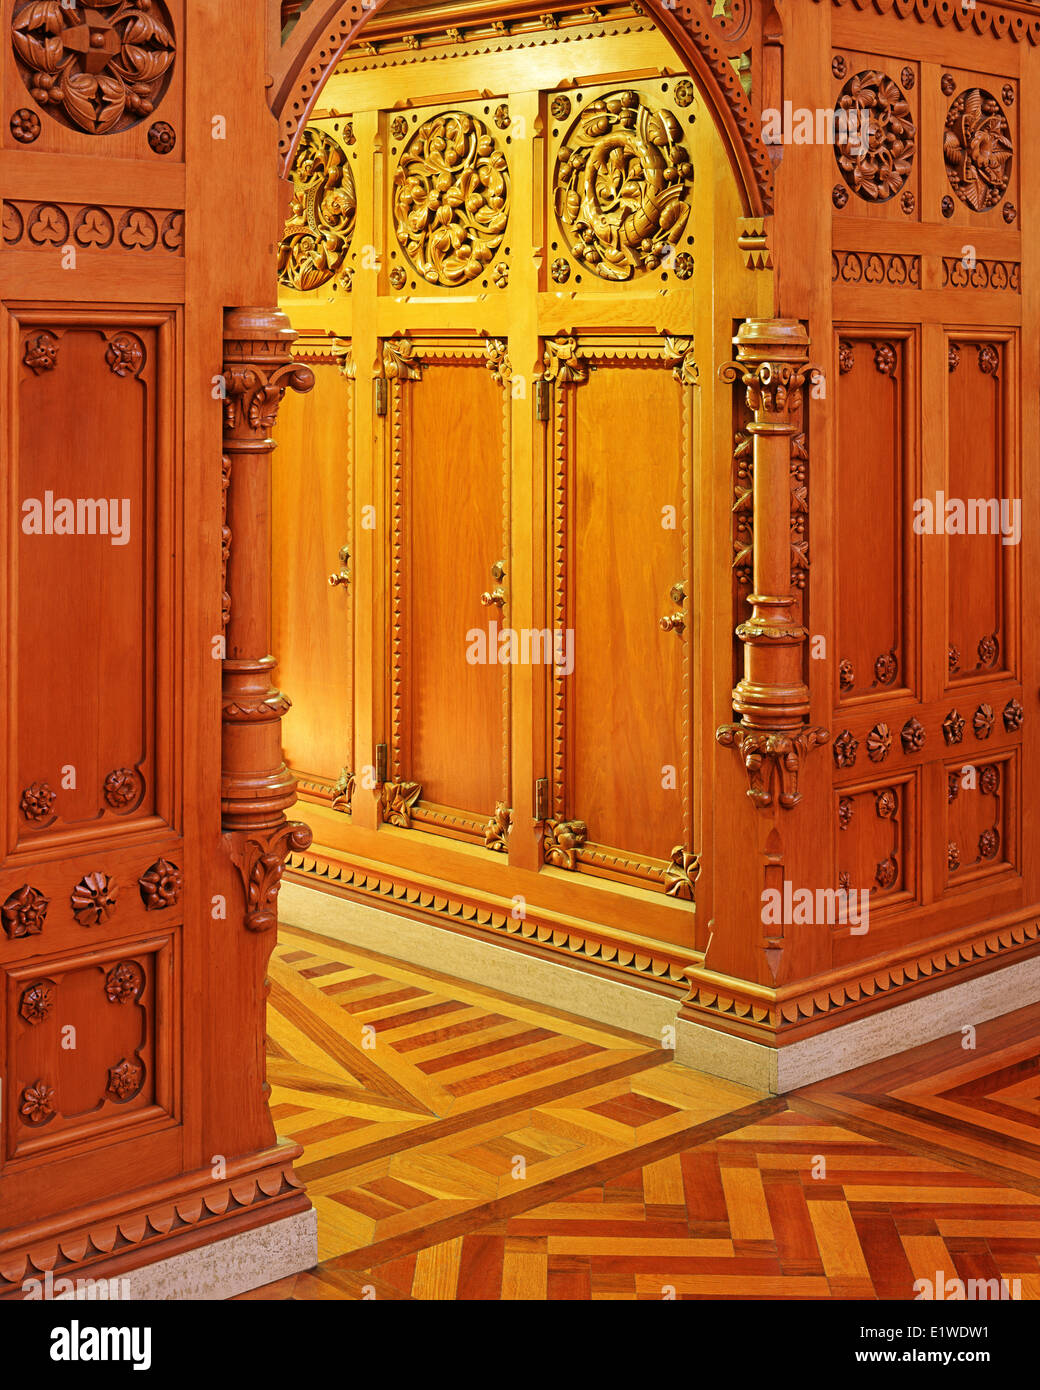 Library of Parliament, Doorway and panelling, Parliament Buildings, Ottawa, Ontario, Canada Stock Photo